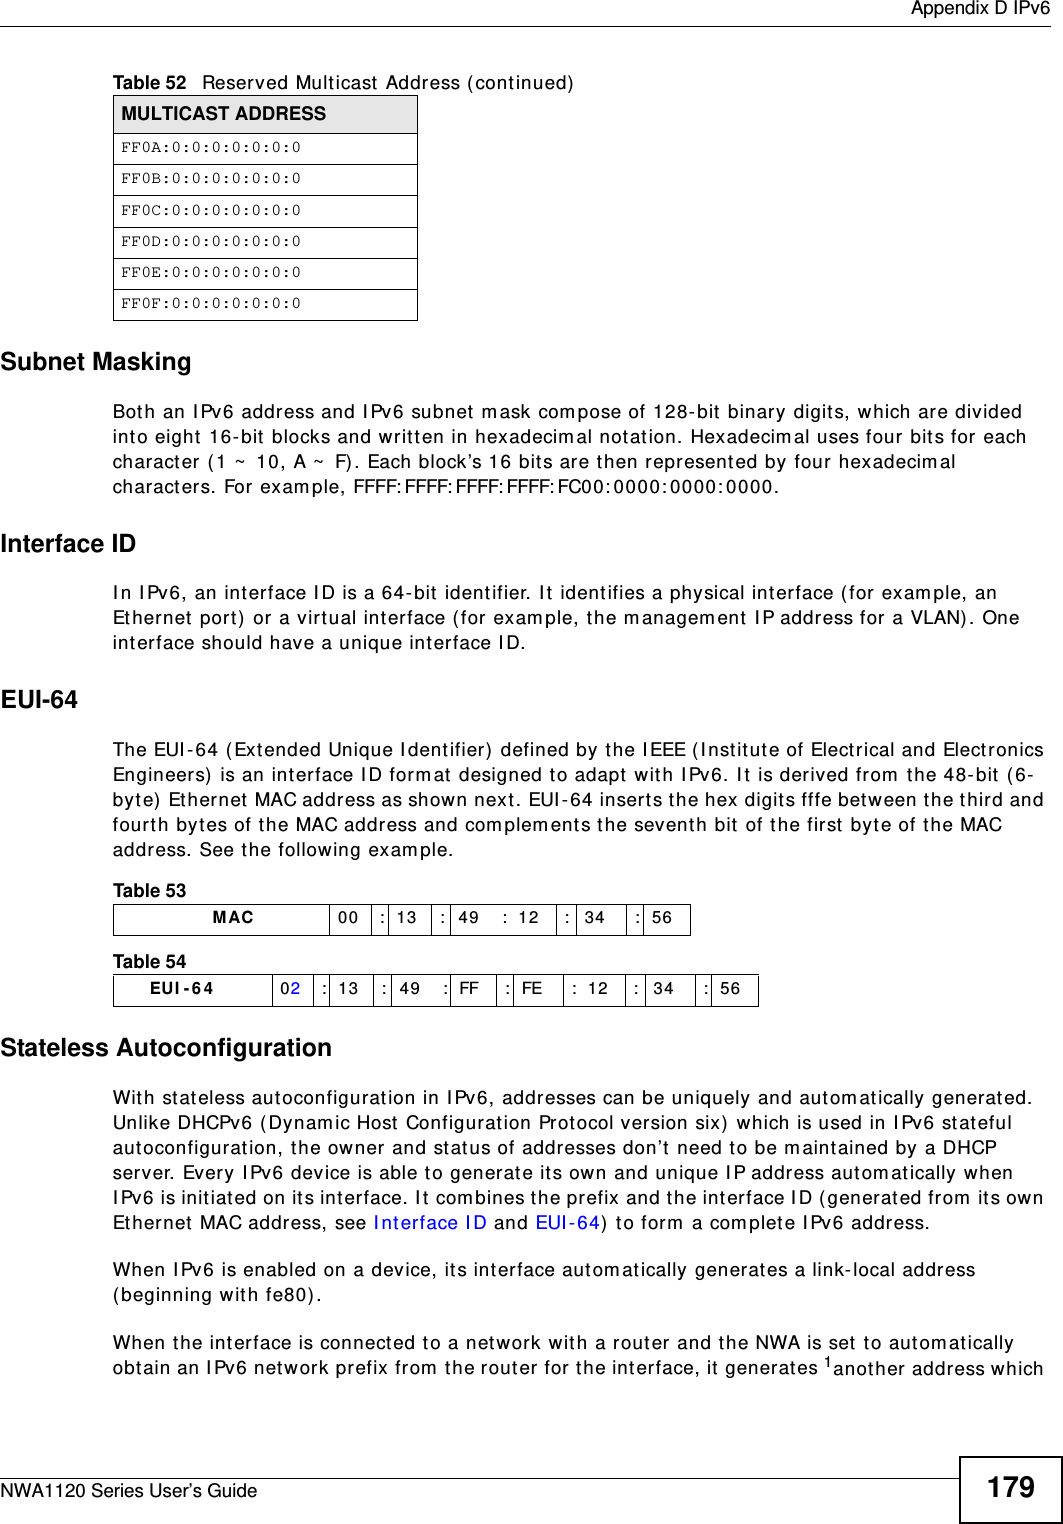  Appendix D IPv6NWA1120 Series User’s Guide 179Subnet MaskingBoth an IPv6 address and IPv6 subnet mask compose of 128-bit binary digits, which are divided into eight 16-bit blocks and written in hexadecimal notation. Hexadecimal uses four bits for each character (1 ~ 10, A ~ F). Each block’s 16 bits are then represented by four hexadecimal characters. For example, FFFF:FFFF:FFFF:FFFF:FC00:0000:0000:0000.Interface IDIn IPv6, an interface ID is a 64-bit identifier. It identifies a physical interface (for example, an Ethernet port) or a virtual interface (for example, the management IP address for a VLAN). One interface should have a unique interface ID.EUI-64The EUI-64 (Extended Unique Identifier) defined by the IEEE (Institute of Electrical and Electronics Engineers) is an interface ID format designed to adapt with IPv6. It is derived from the 48-bit (6-byte) Ethernet MAC address as shown next. EUI-64 inserts the hex digits fffe between the third and fourth bytes of the MAC address and complements the seventh bit of the first byte of the MAC address. See the following example. Stateless AutoconfigurationWith stateless autoconfiguration in IPv6, addresses can be uniquely and automatically generated. Unlike DHCPv6 (Dynamic Host Configuration Protocol version six) which is used in IPv6 stateful autoconfiguration, the owner and status of addresses don’t need to be maintained by a DHCP server. Every IPv6 device is able to generate its own and unique IP address automatically when IPv6 is initiated on its interface. It combines the prefix and the interface ID (generated from its own Ethernet MAC address, see Interface ID and EUI-64) to form a complete IPv6 address.When IPv6 is enabled on a device, its interface automatically generates a link-local address (beginning with fe80).When the interface is connected to a network with a router and the NWA is set to automatically obtain an IPv6 network prefix from the router for the interface, it generates 1another address which FF0A:0:0:0:0:0:0:0FF0B:0:0:0:0:0:0:0FF0C:0:0:0:0:0:0:0FF0D:0:0:0:0:0:0:0FF0E:0:0:0:0:0:0:0FF0F:0:0:0:0:0:0:0Table 52   Reserved Multicast Address (continued)MULTICAST ADDRESSTable 53                   MAC 00 : 13 : 49 : 12 : 34 : 56Table 54        EUI-64 02: 13 : 49 : FF : FE : 12 : 34 : 56